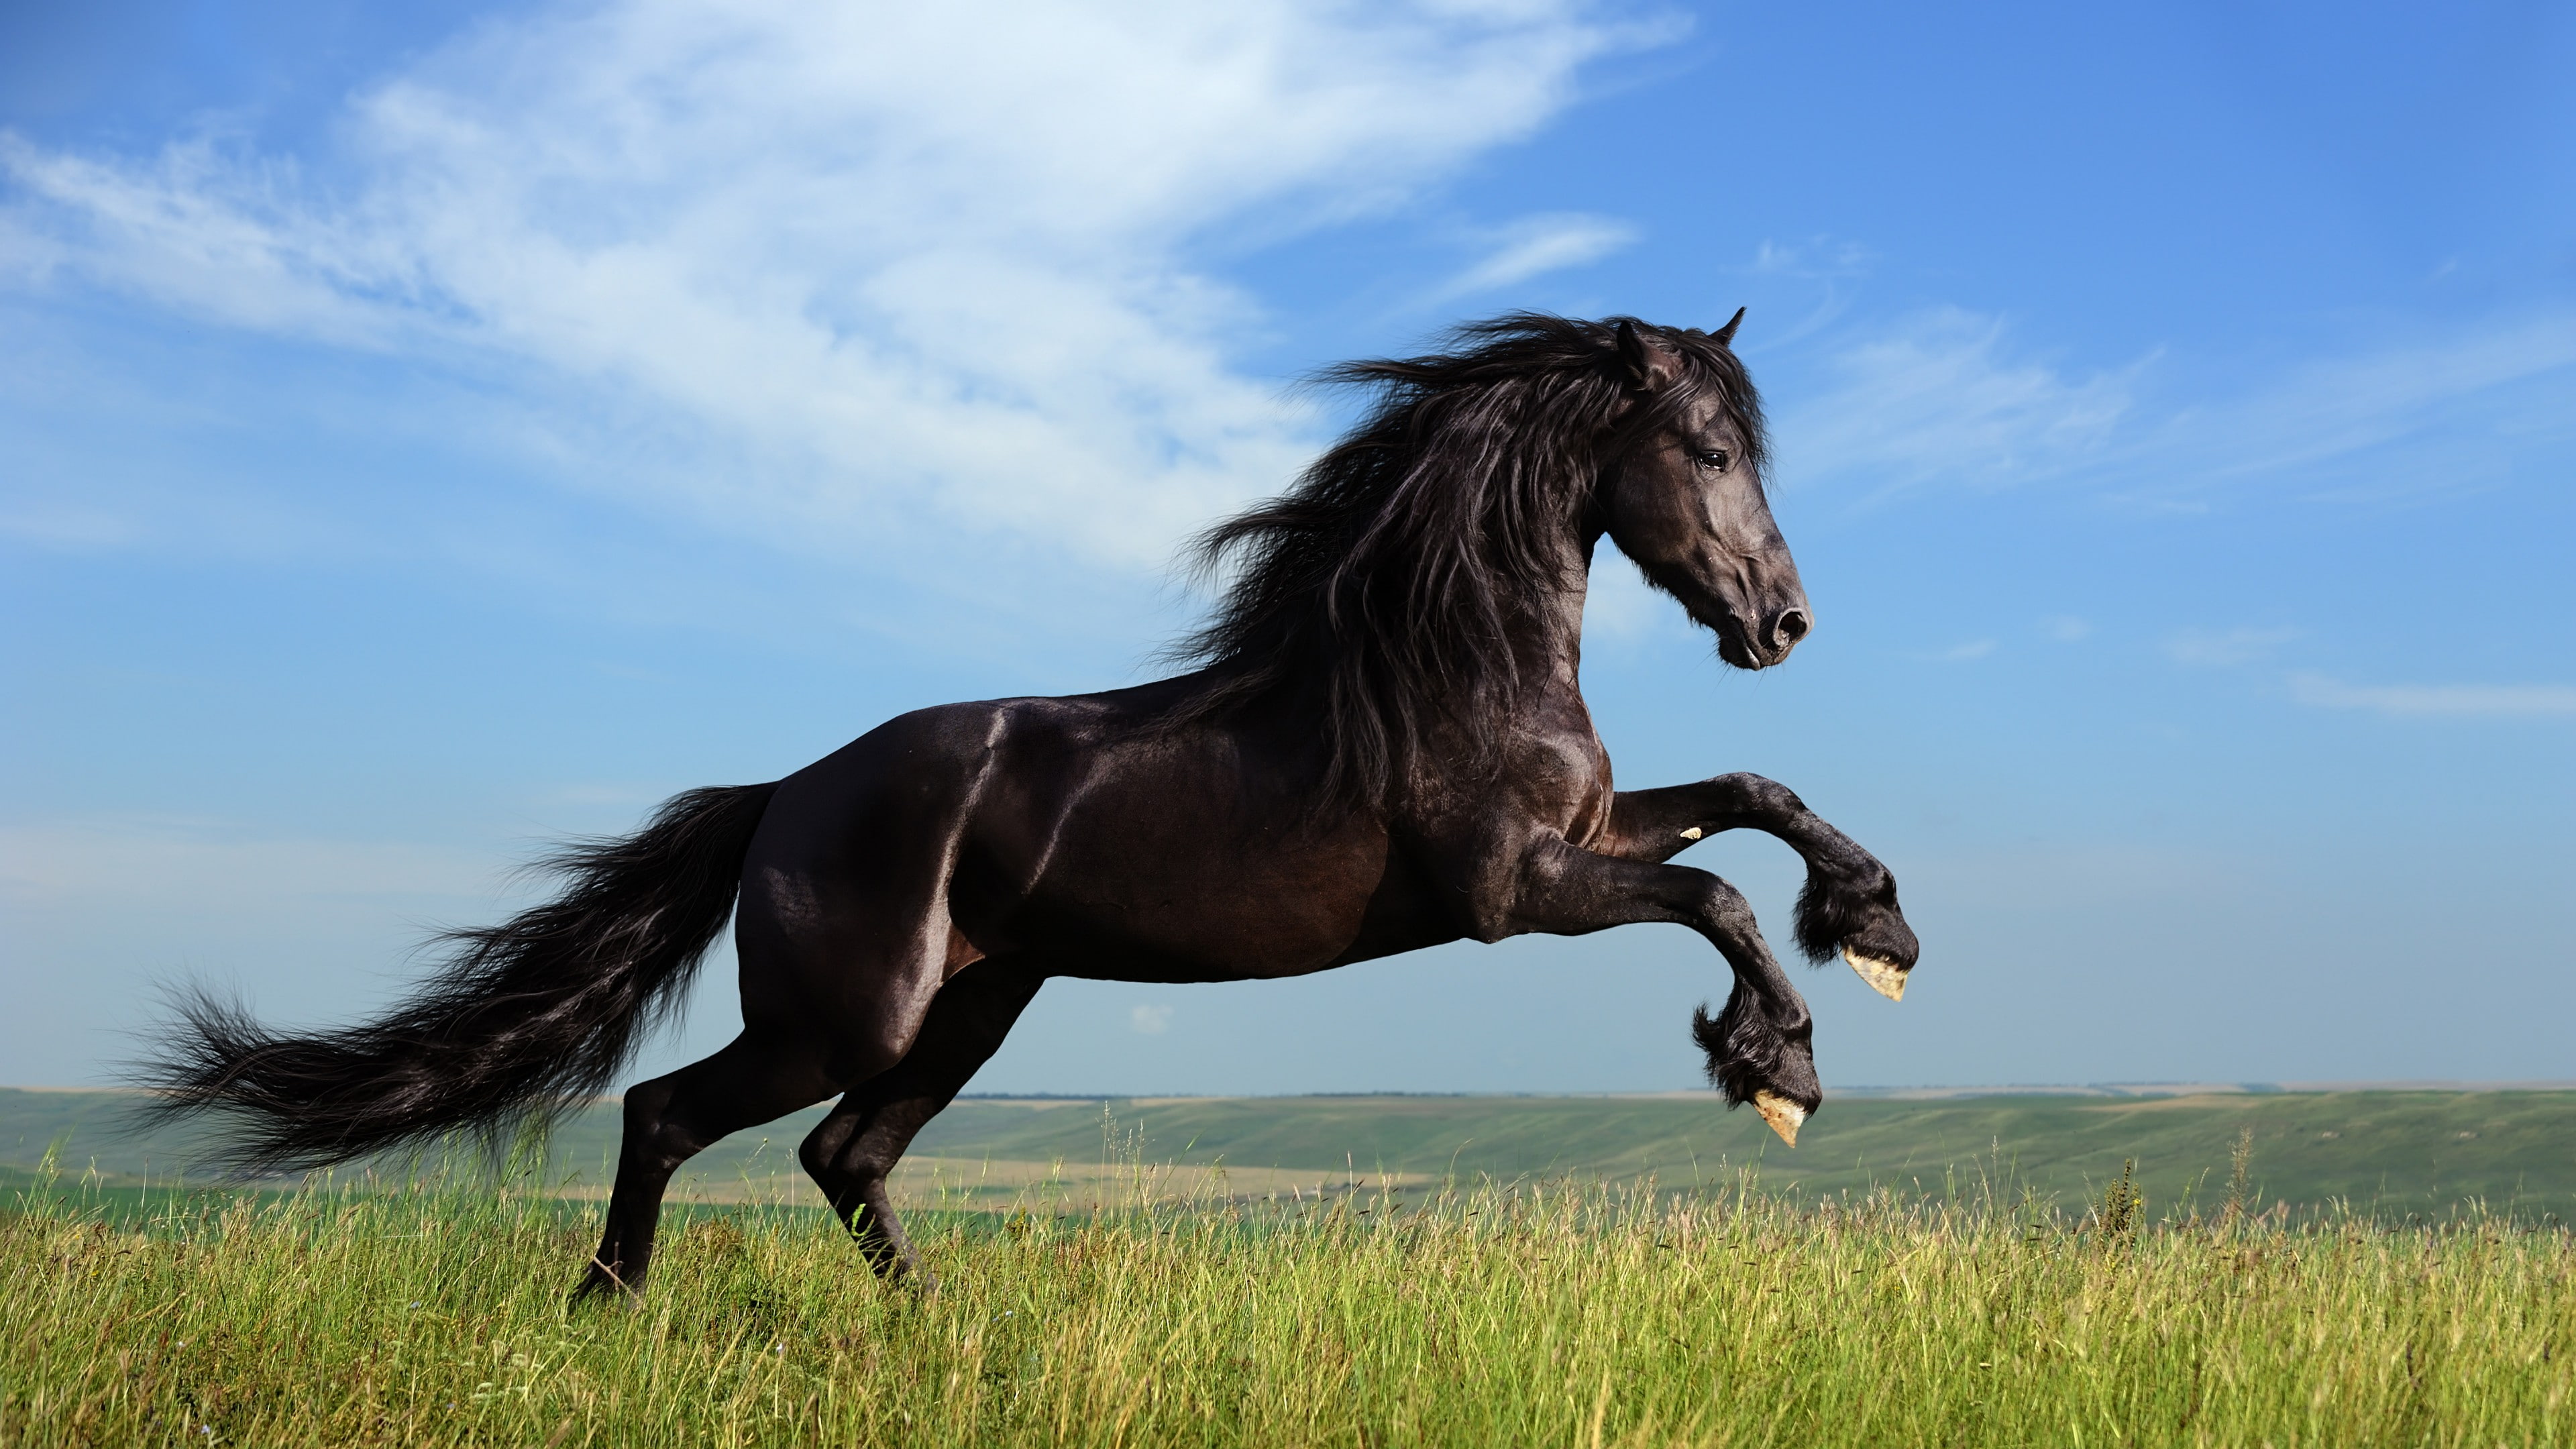 black horse jumping on grass field, gallop, meadow, sky